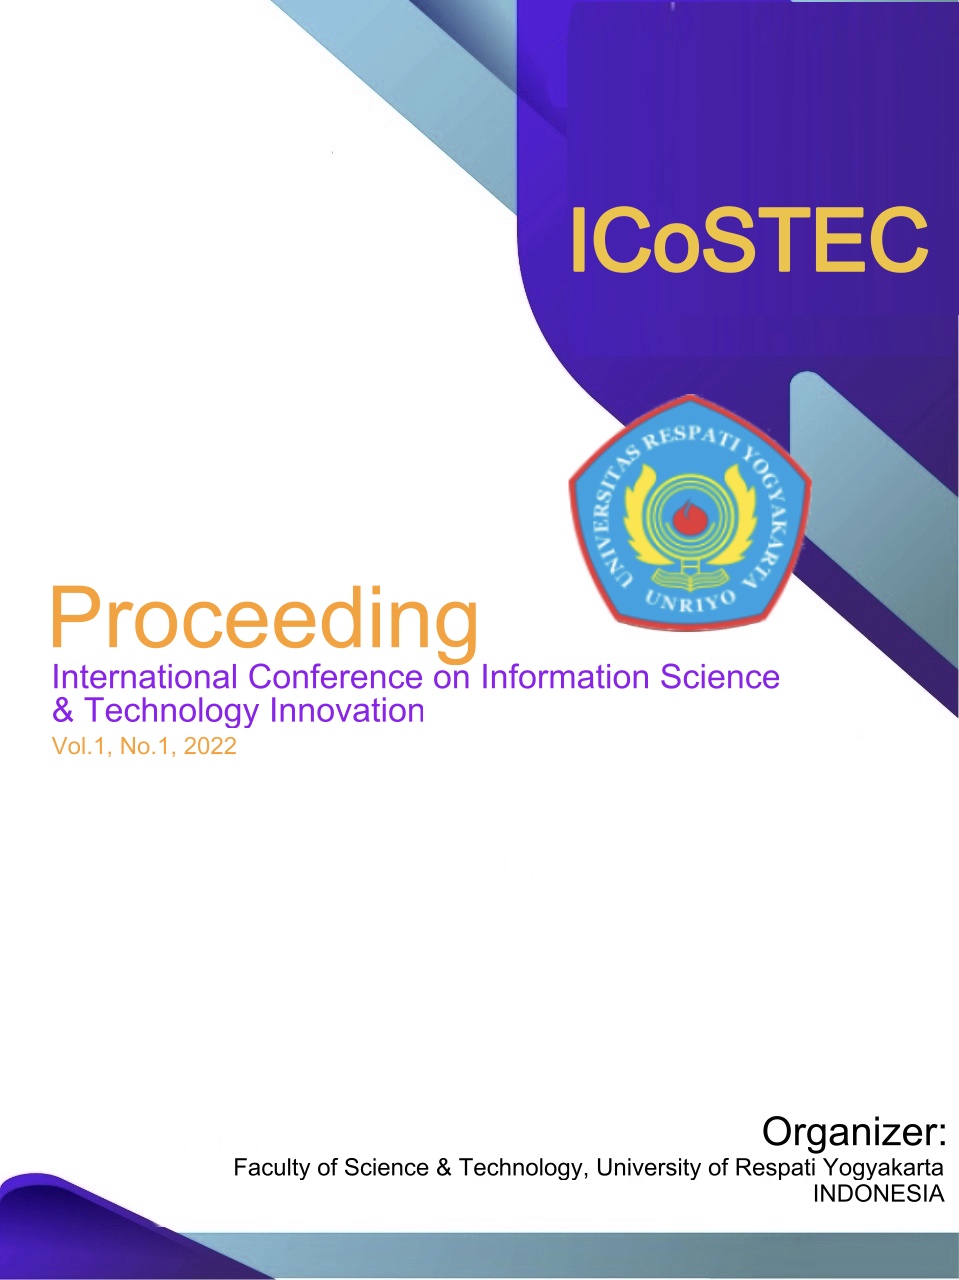 					View Vol. 1 No. 1 (2022): Proceeding of International Conference on Information Science and Technology Innovation (ICoSTEC) 2022
				